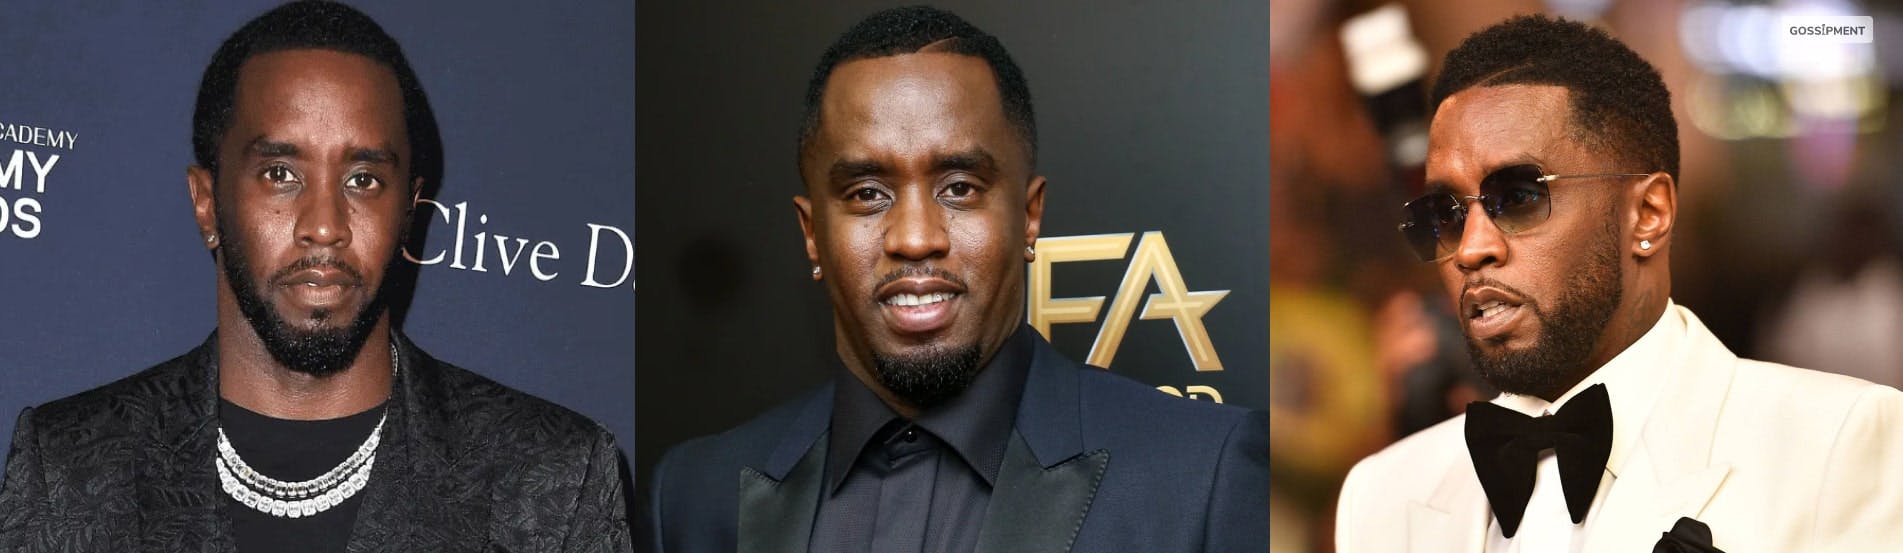 Cover Image for P Diddy | Wiki, Biography, Songs, Net Worth, News All Updates 2022